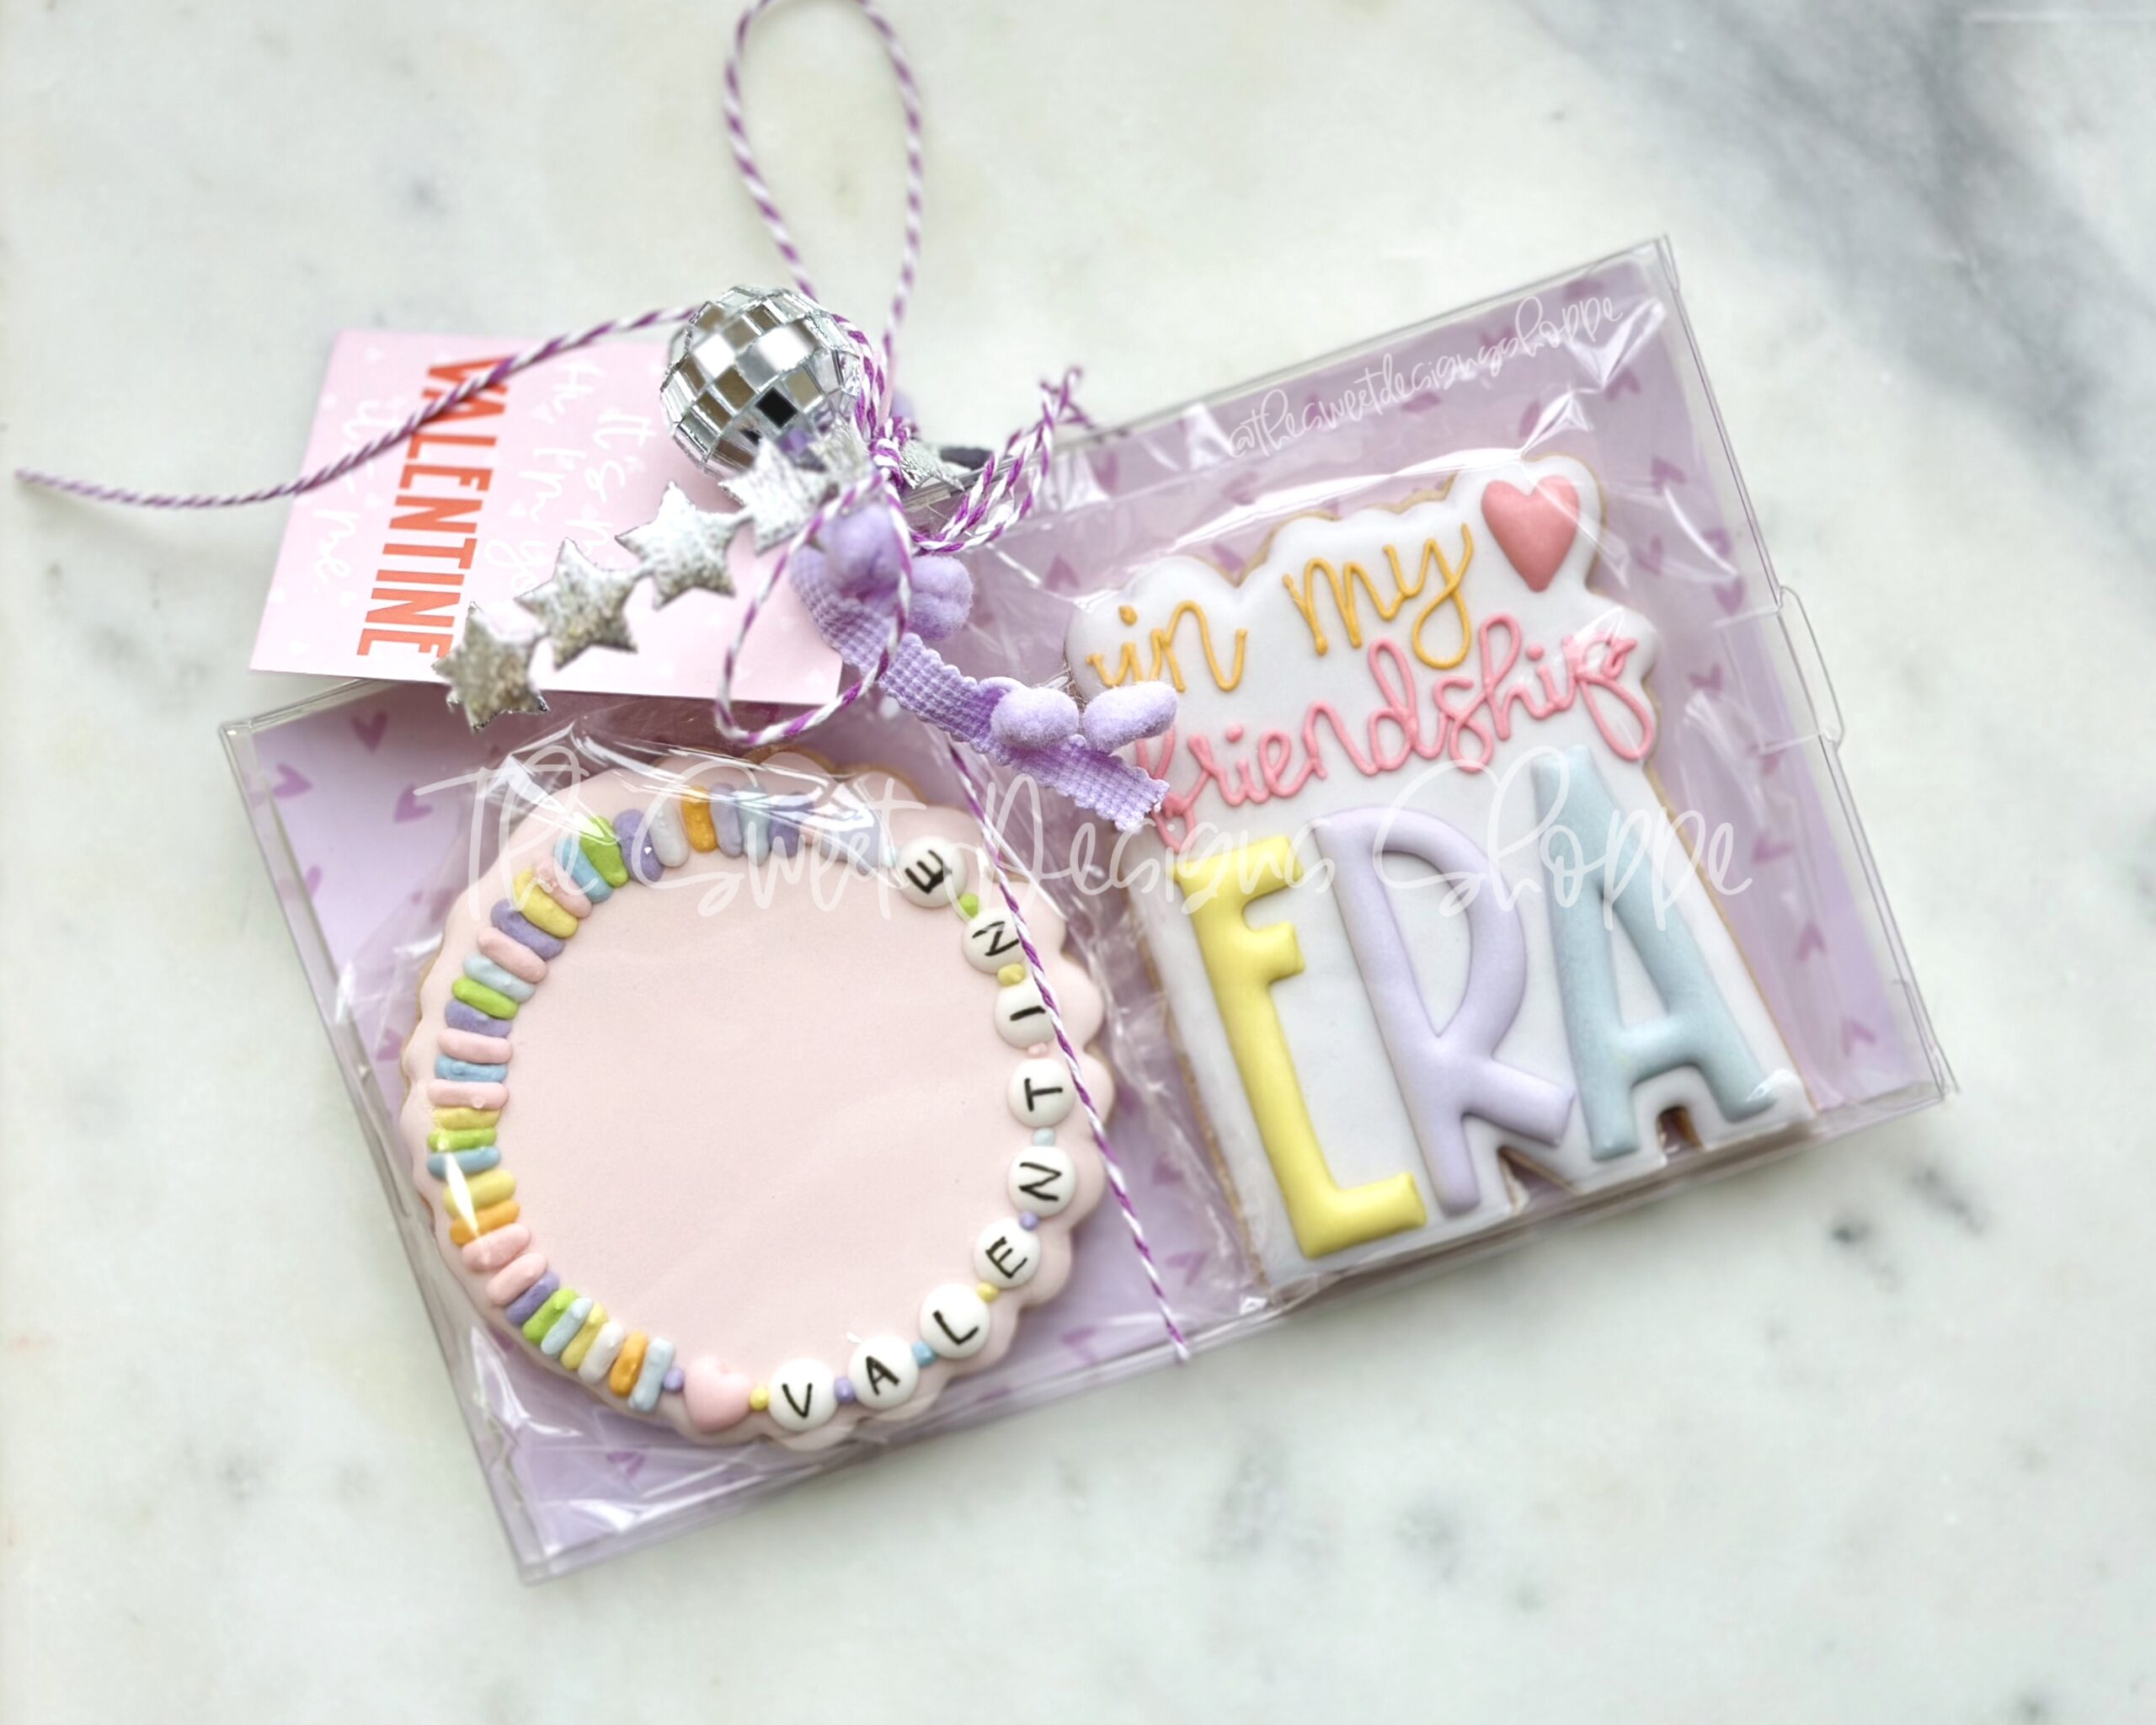 TS Friendship Bracelet and Plaque - Set from The Sweet Designs Shoppe